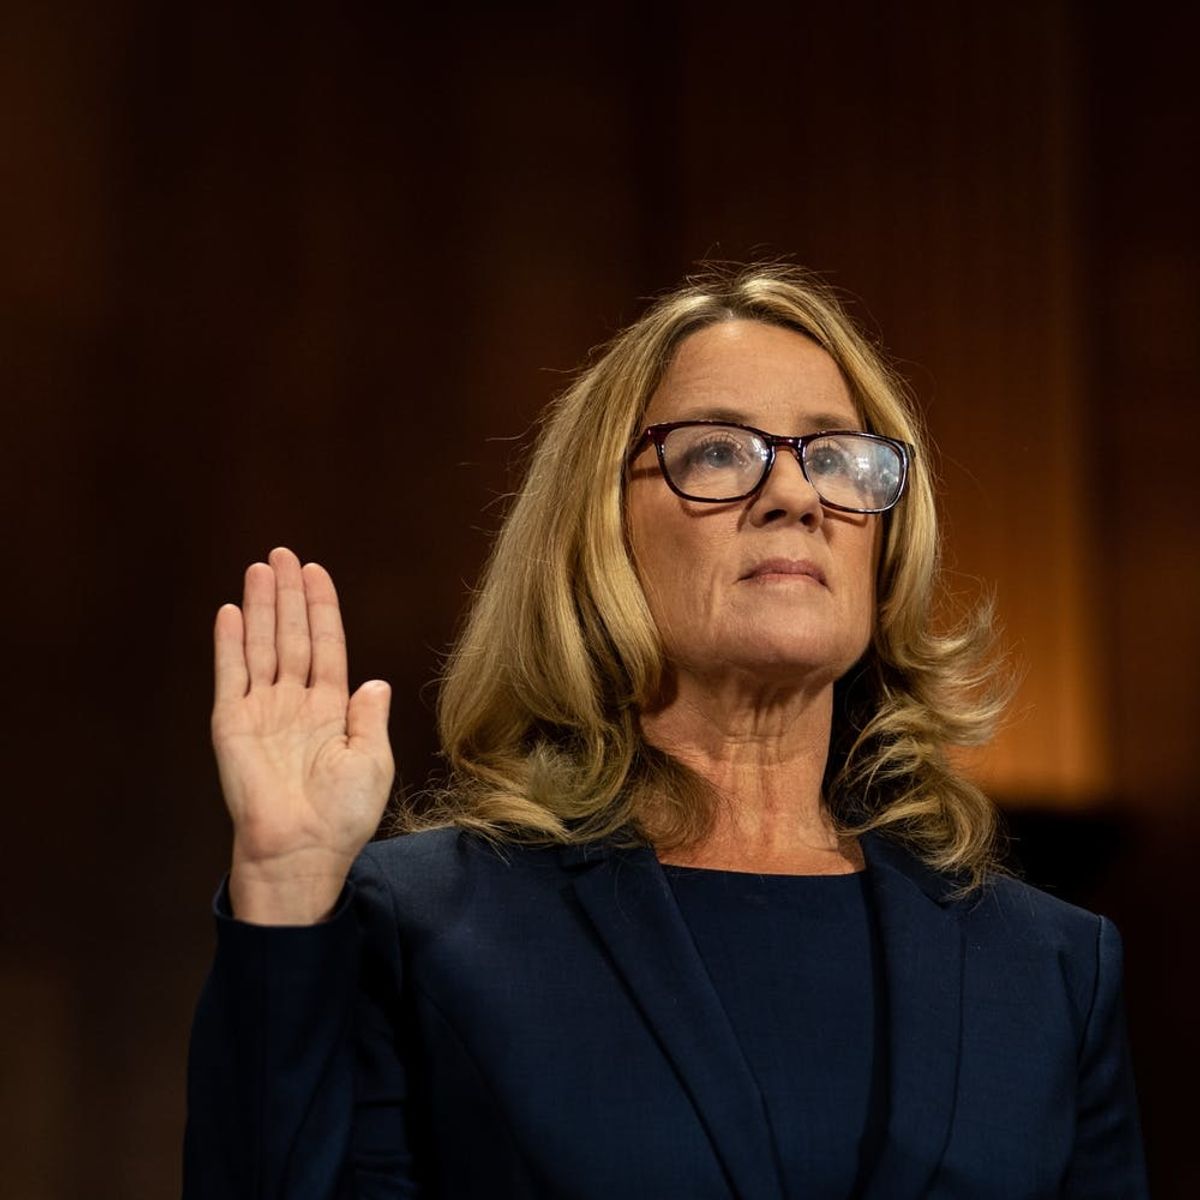 Dr. Christine Blasey Ford Joins the Ranks of Women We’ve Failed in the Name of Justice